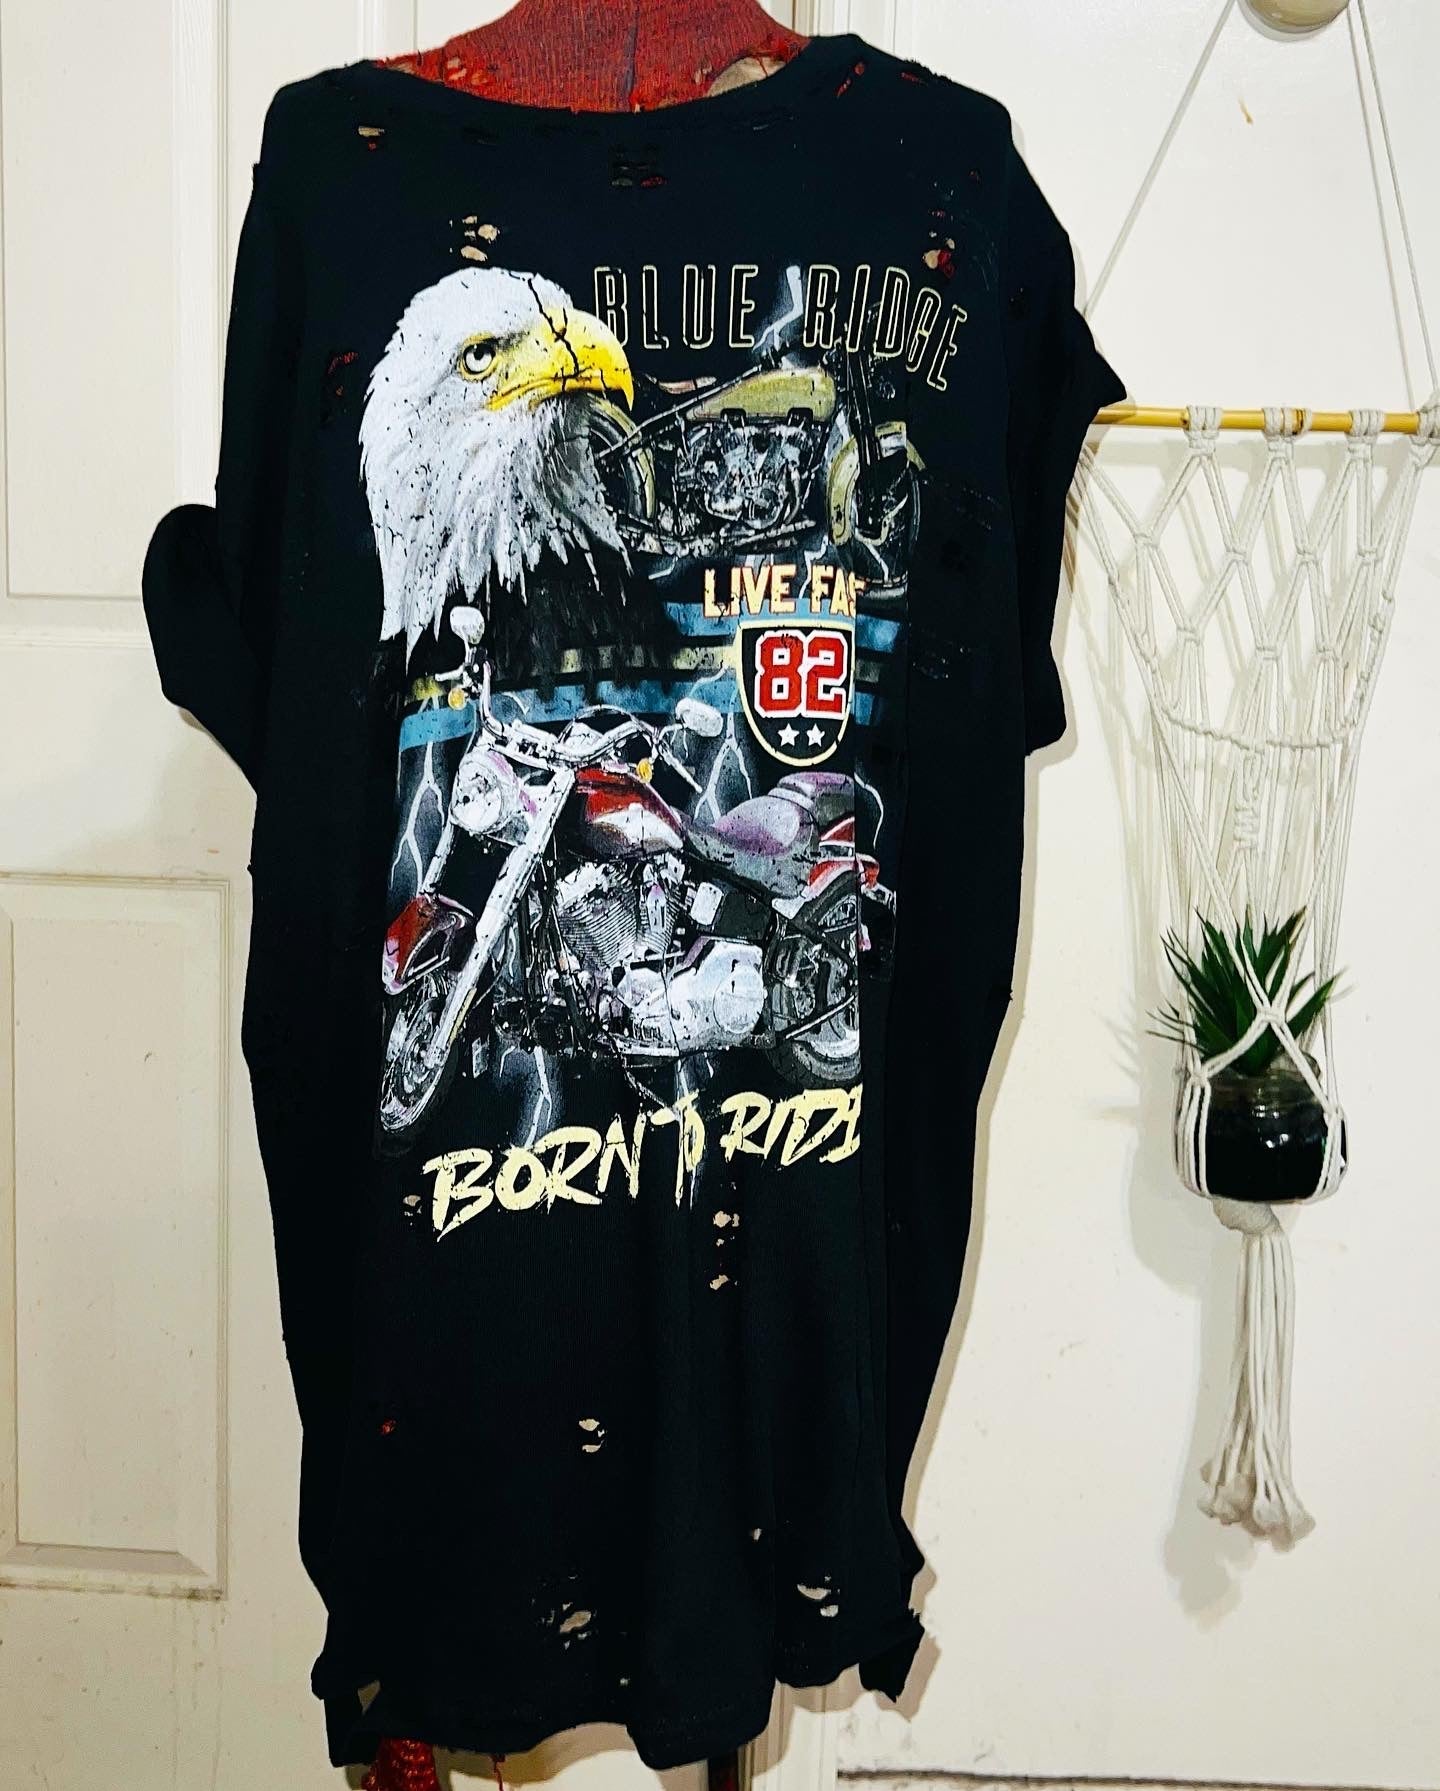 Born To Ride Motorcycle Oversized Distressed Tee